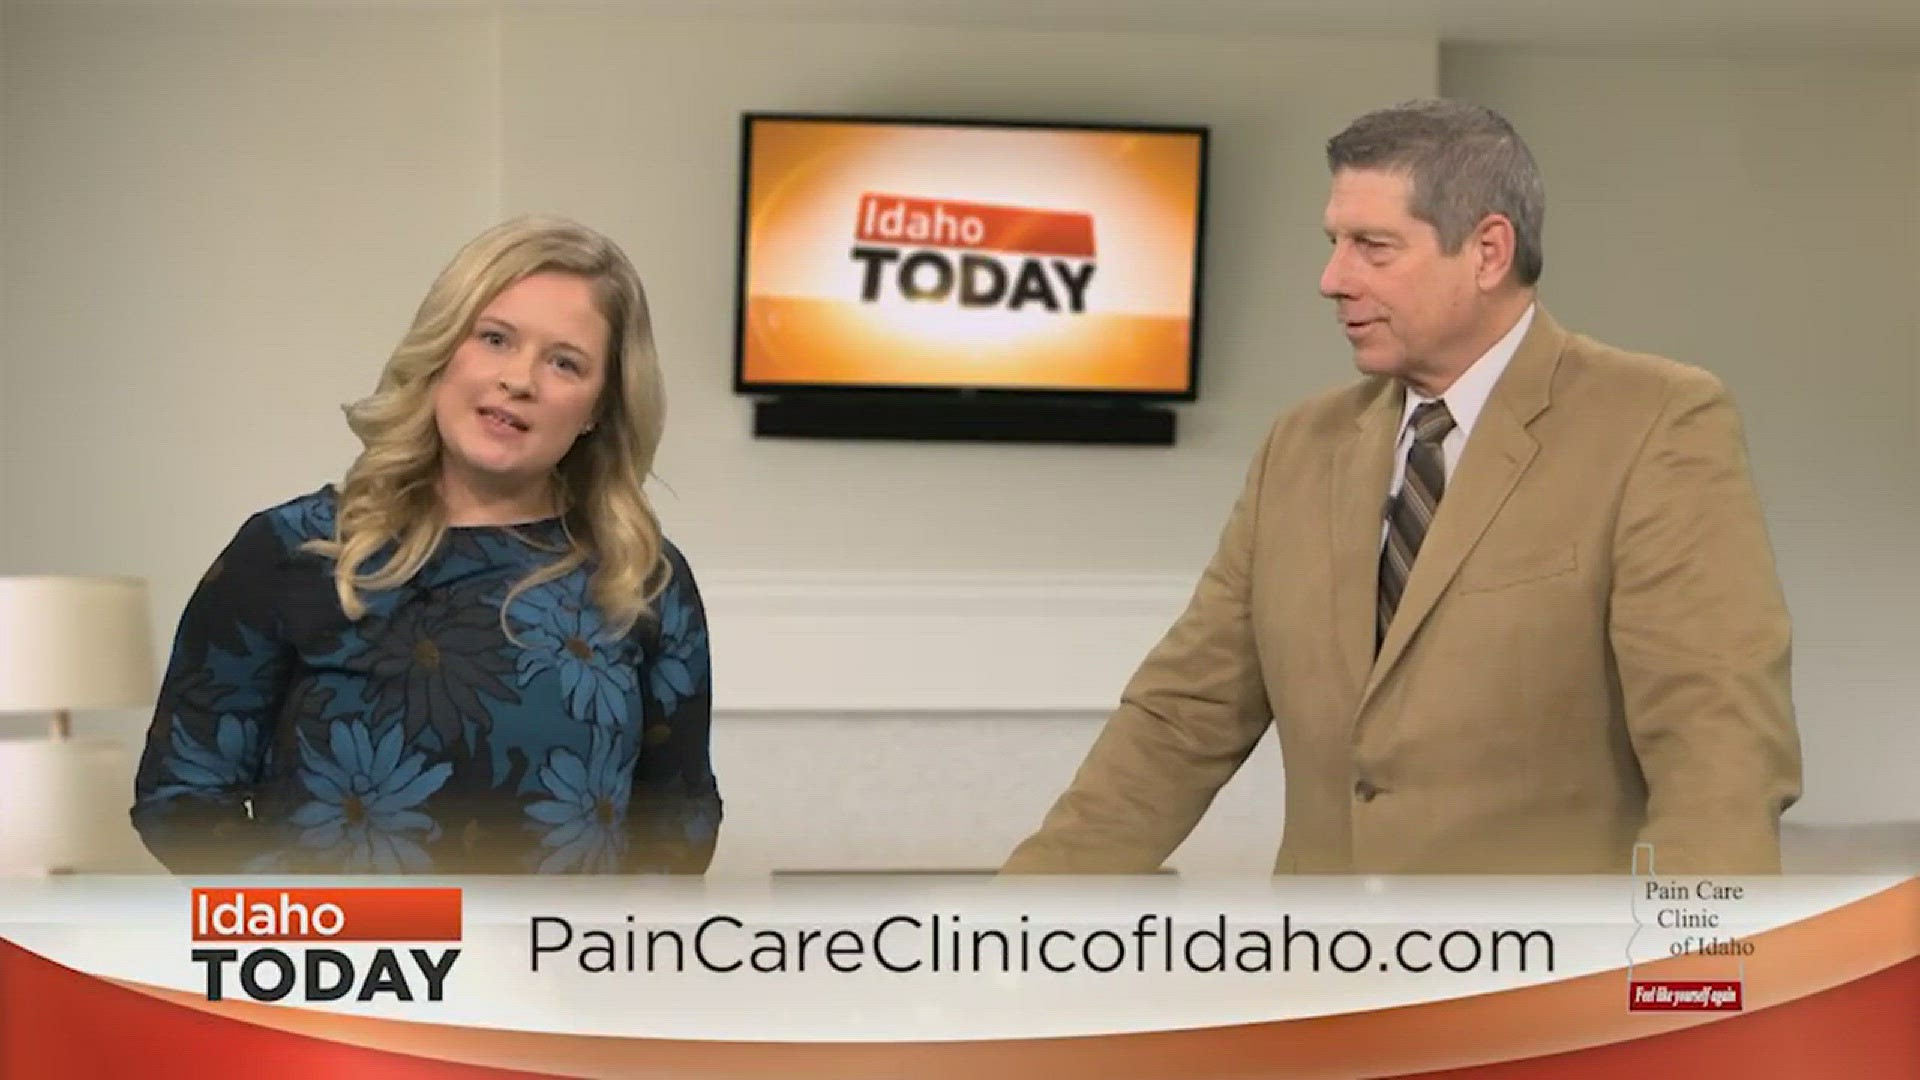 Dr. Edmund Boese M.D. of Pain Care Clinic Of Idaho? explains why patients need to get a screening before starting scrambler therapy. For more information, visit paincareclinicofidaho.com.